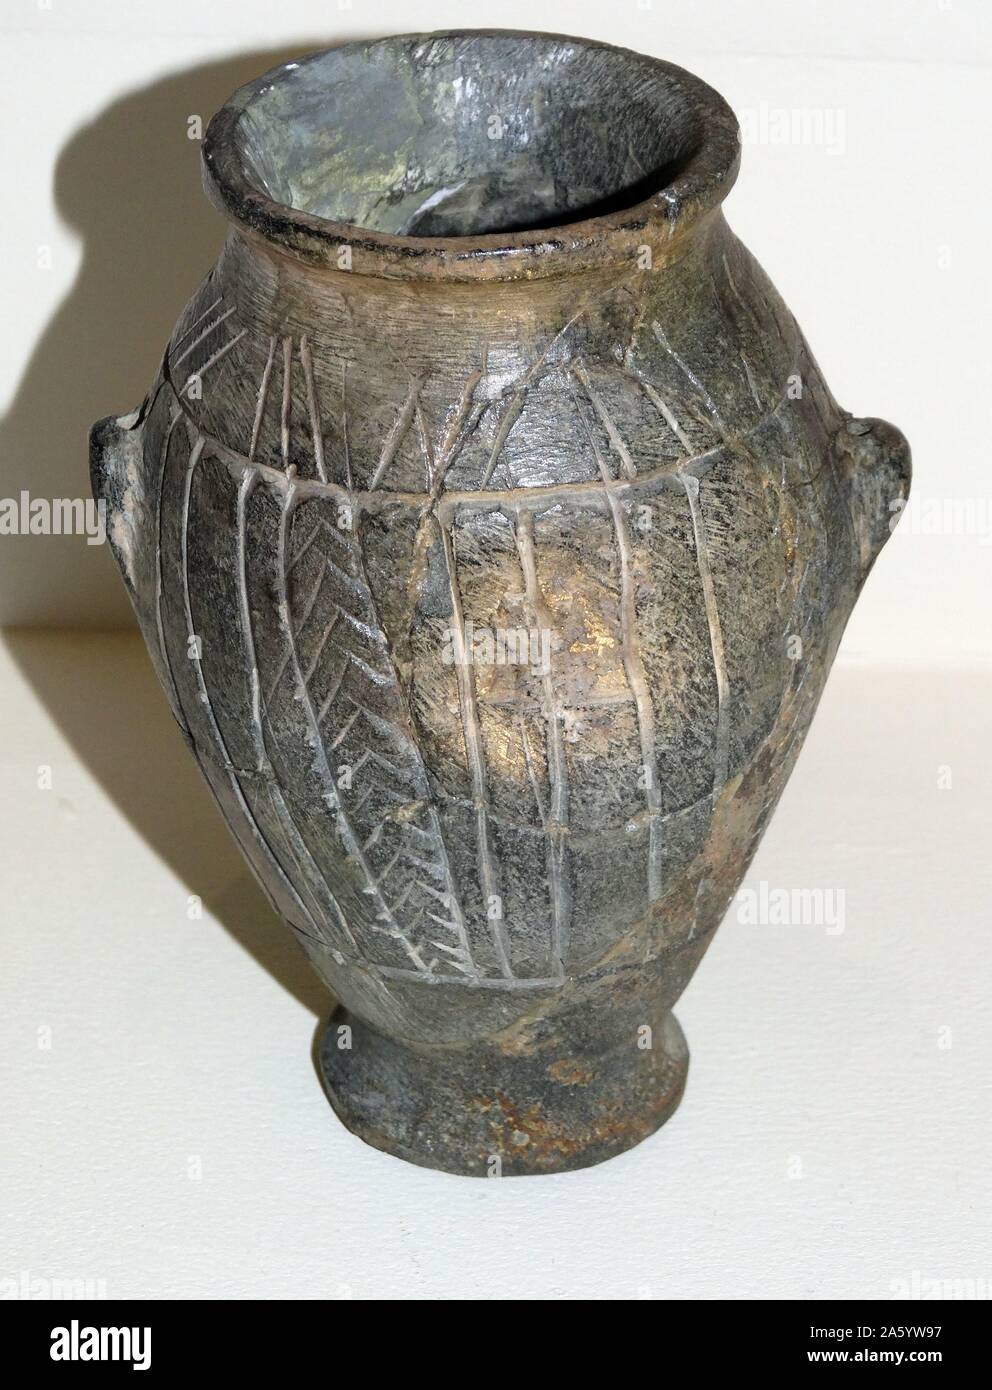 Stone jar from Late Bronze Age tombs in Cyprus. Dated 12th Century BC. Stock Photo